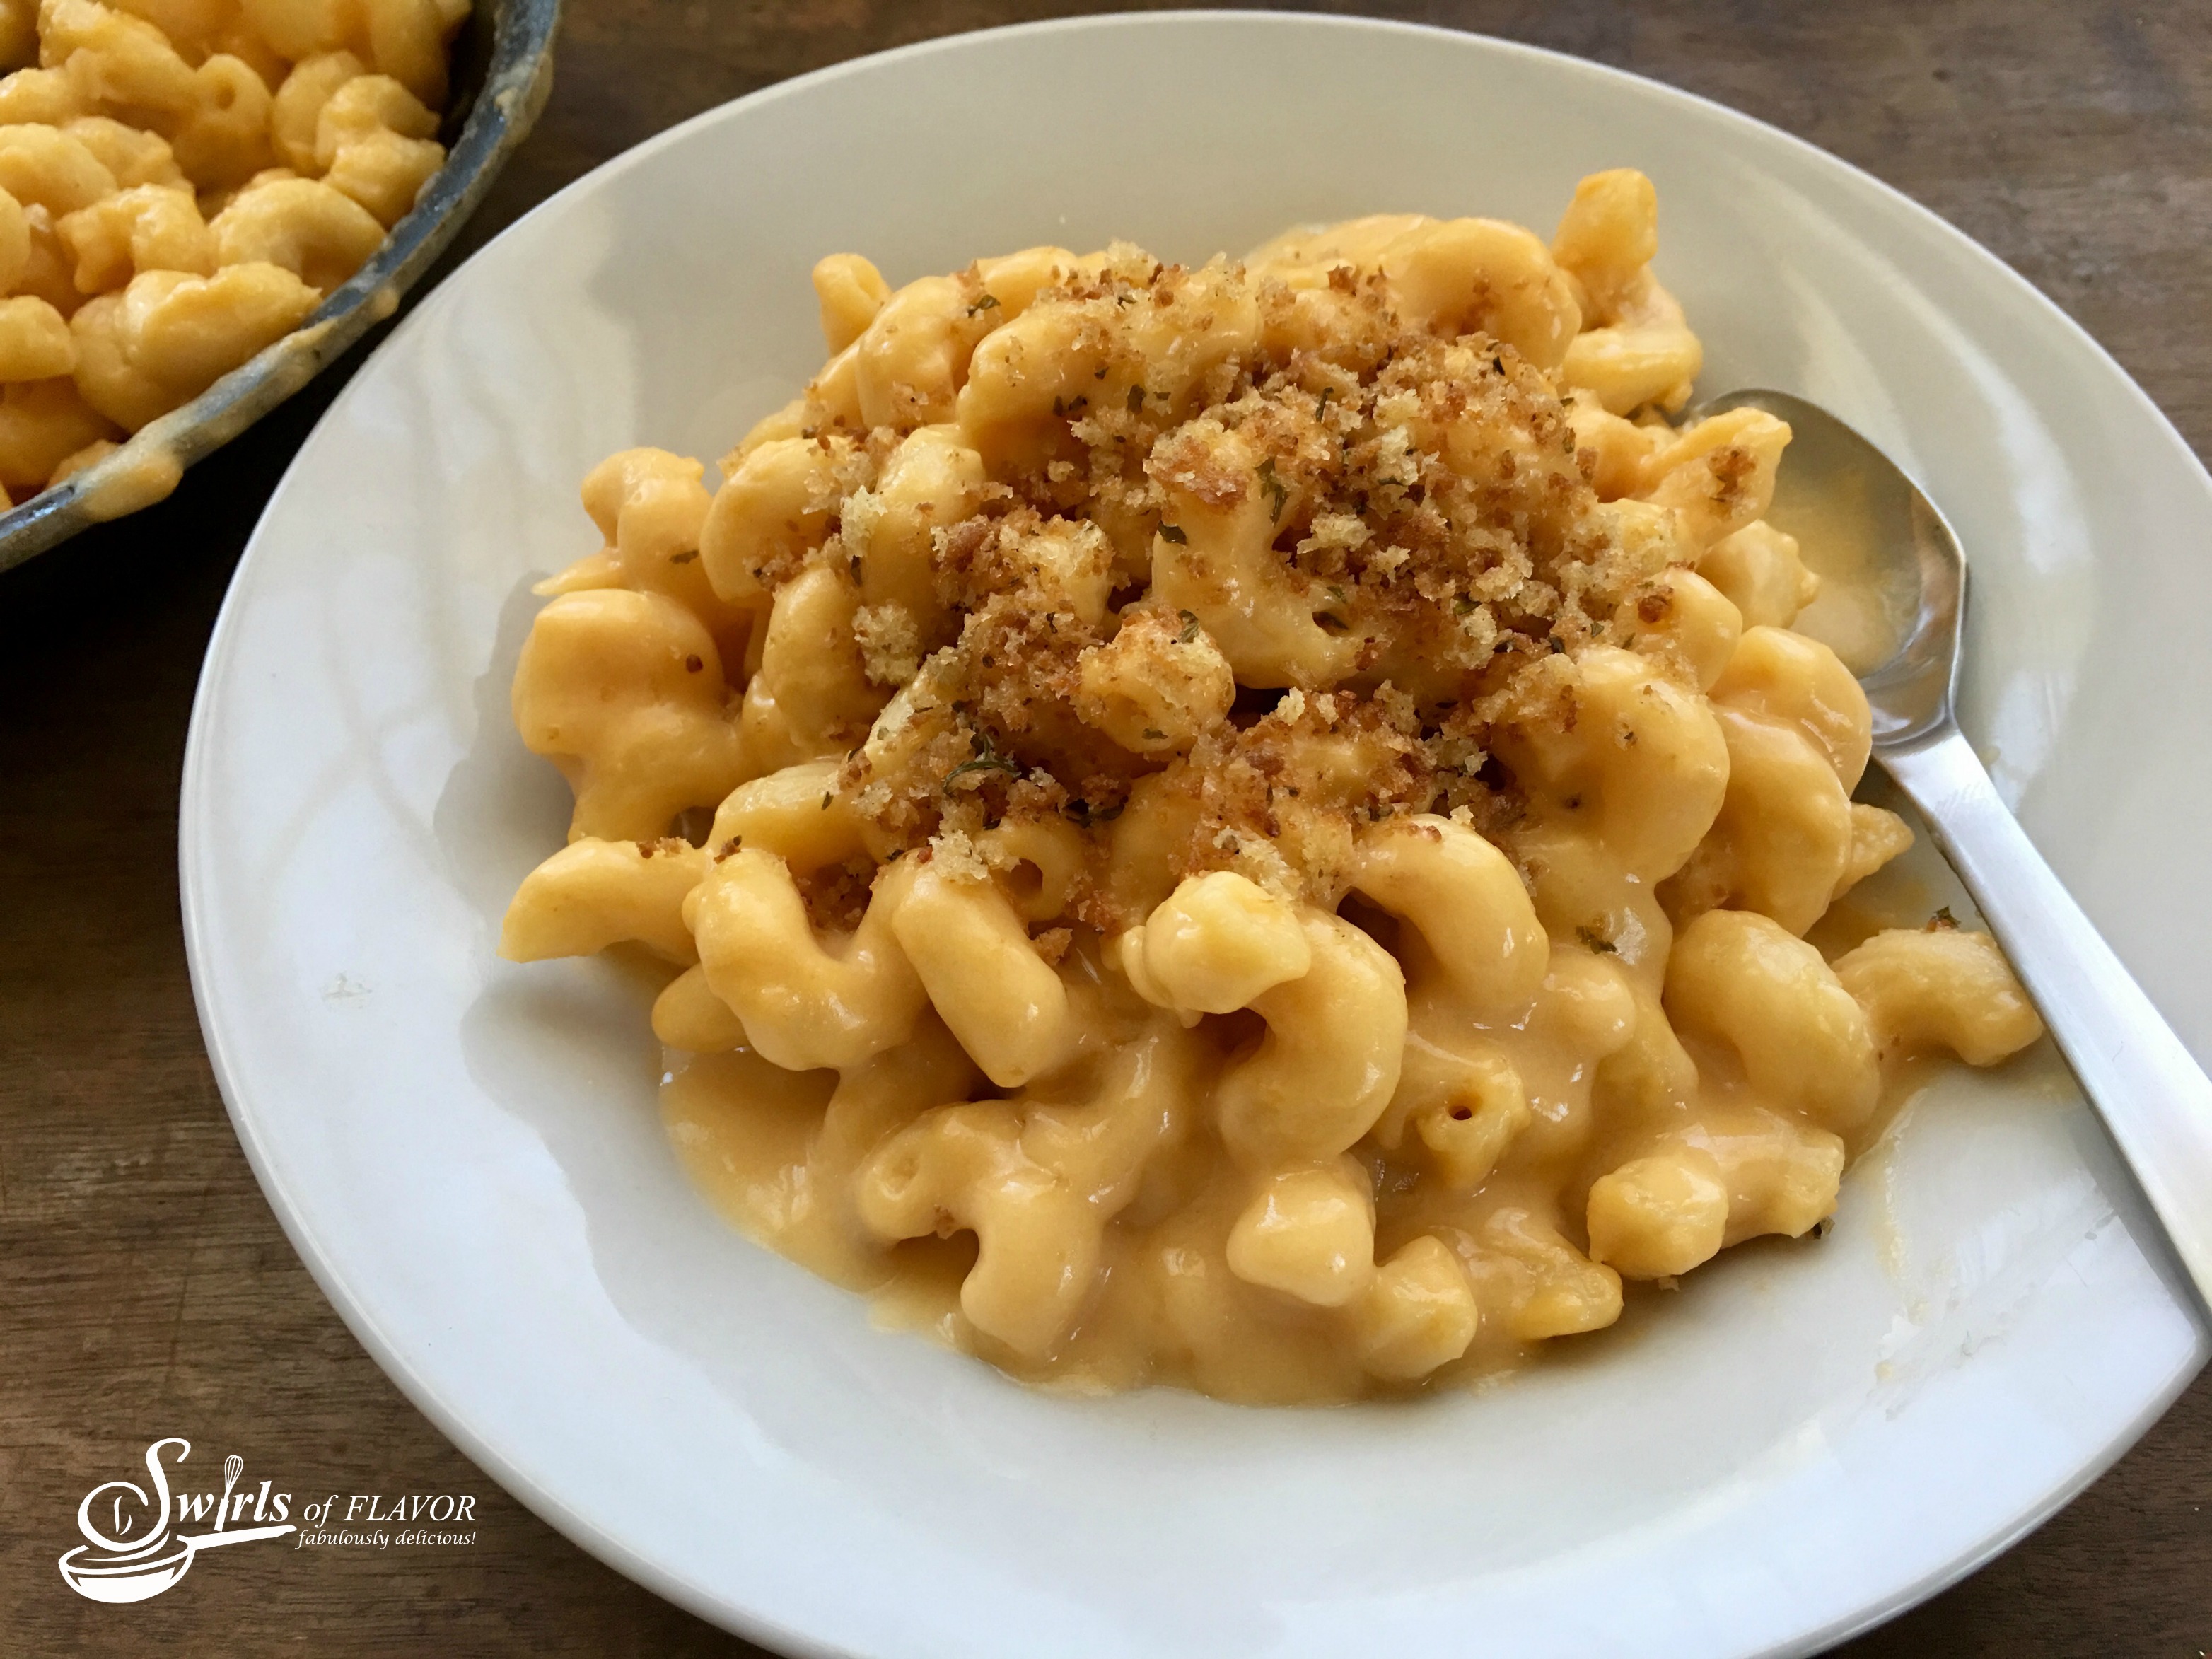 One Pot Mac 'N Cheese is an easy recipe for a busy weeknight dinner. Homemade mac and cheese is so easy to make when the pasta, cheesy sauce and breadcrumb topping are all cooked together in the same skillet! #easyrecipe #dinner #macandcheese #homemade #homemademacandcheese #onepot #onepotmacand cheese #funforkids #famiyfavorite #meatlessmonday #pasta #swirlsofflavor